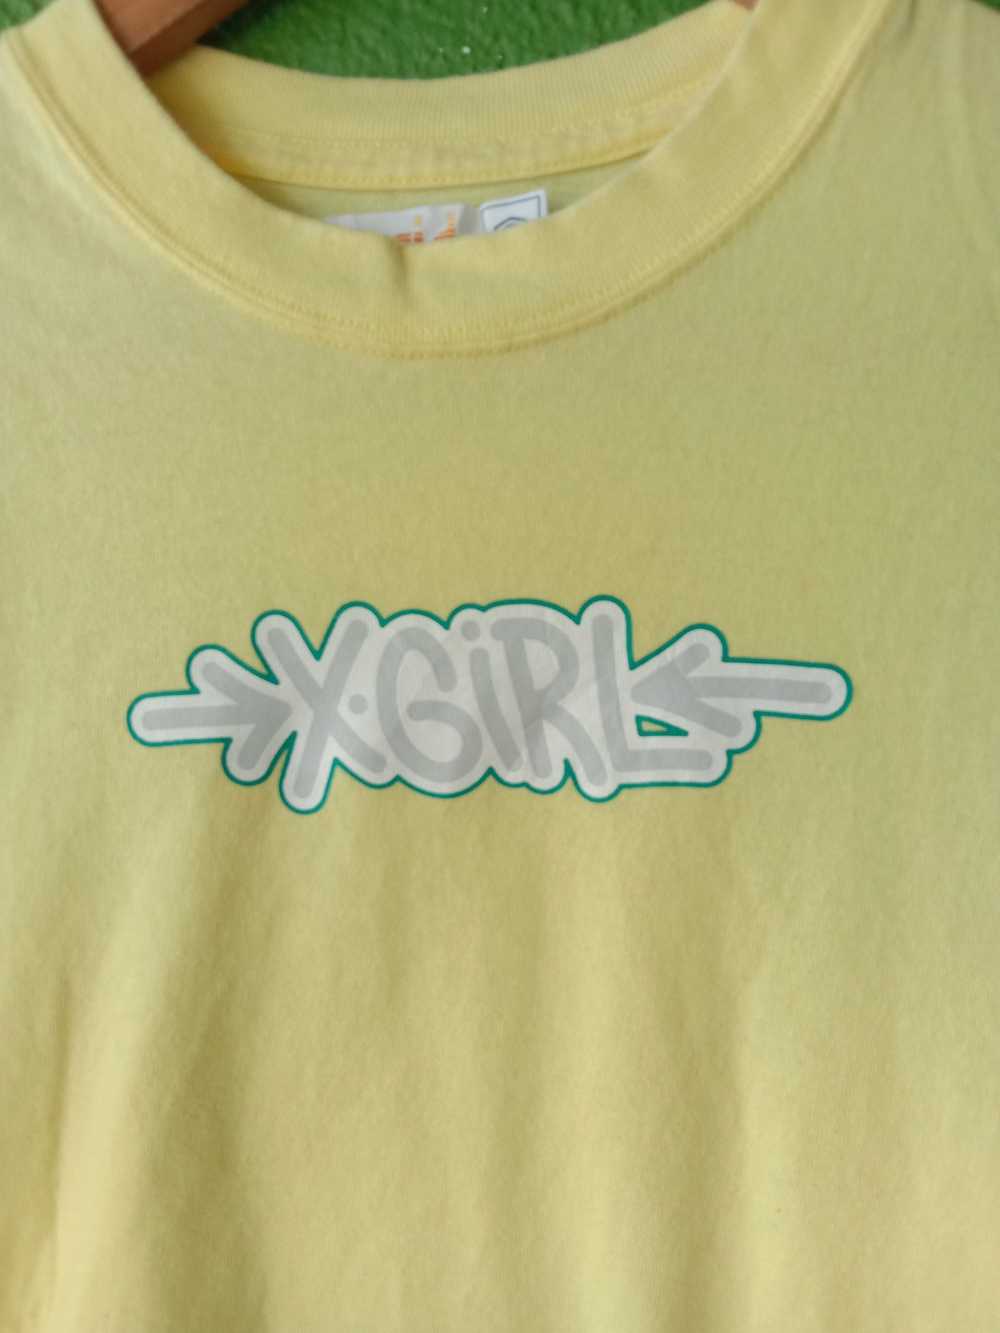 Japanese Brand X-girl spellout tee - image 9